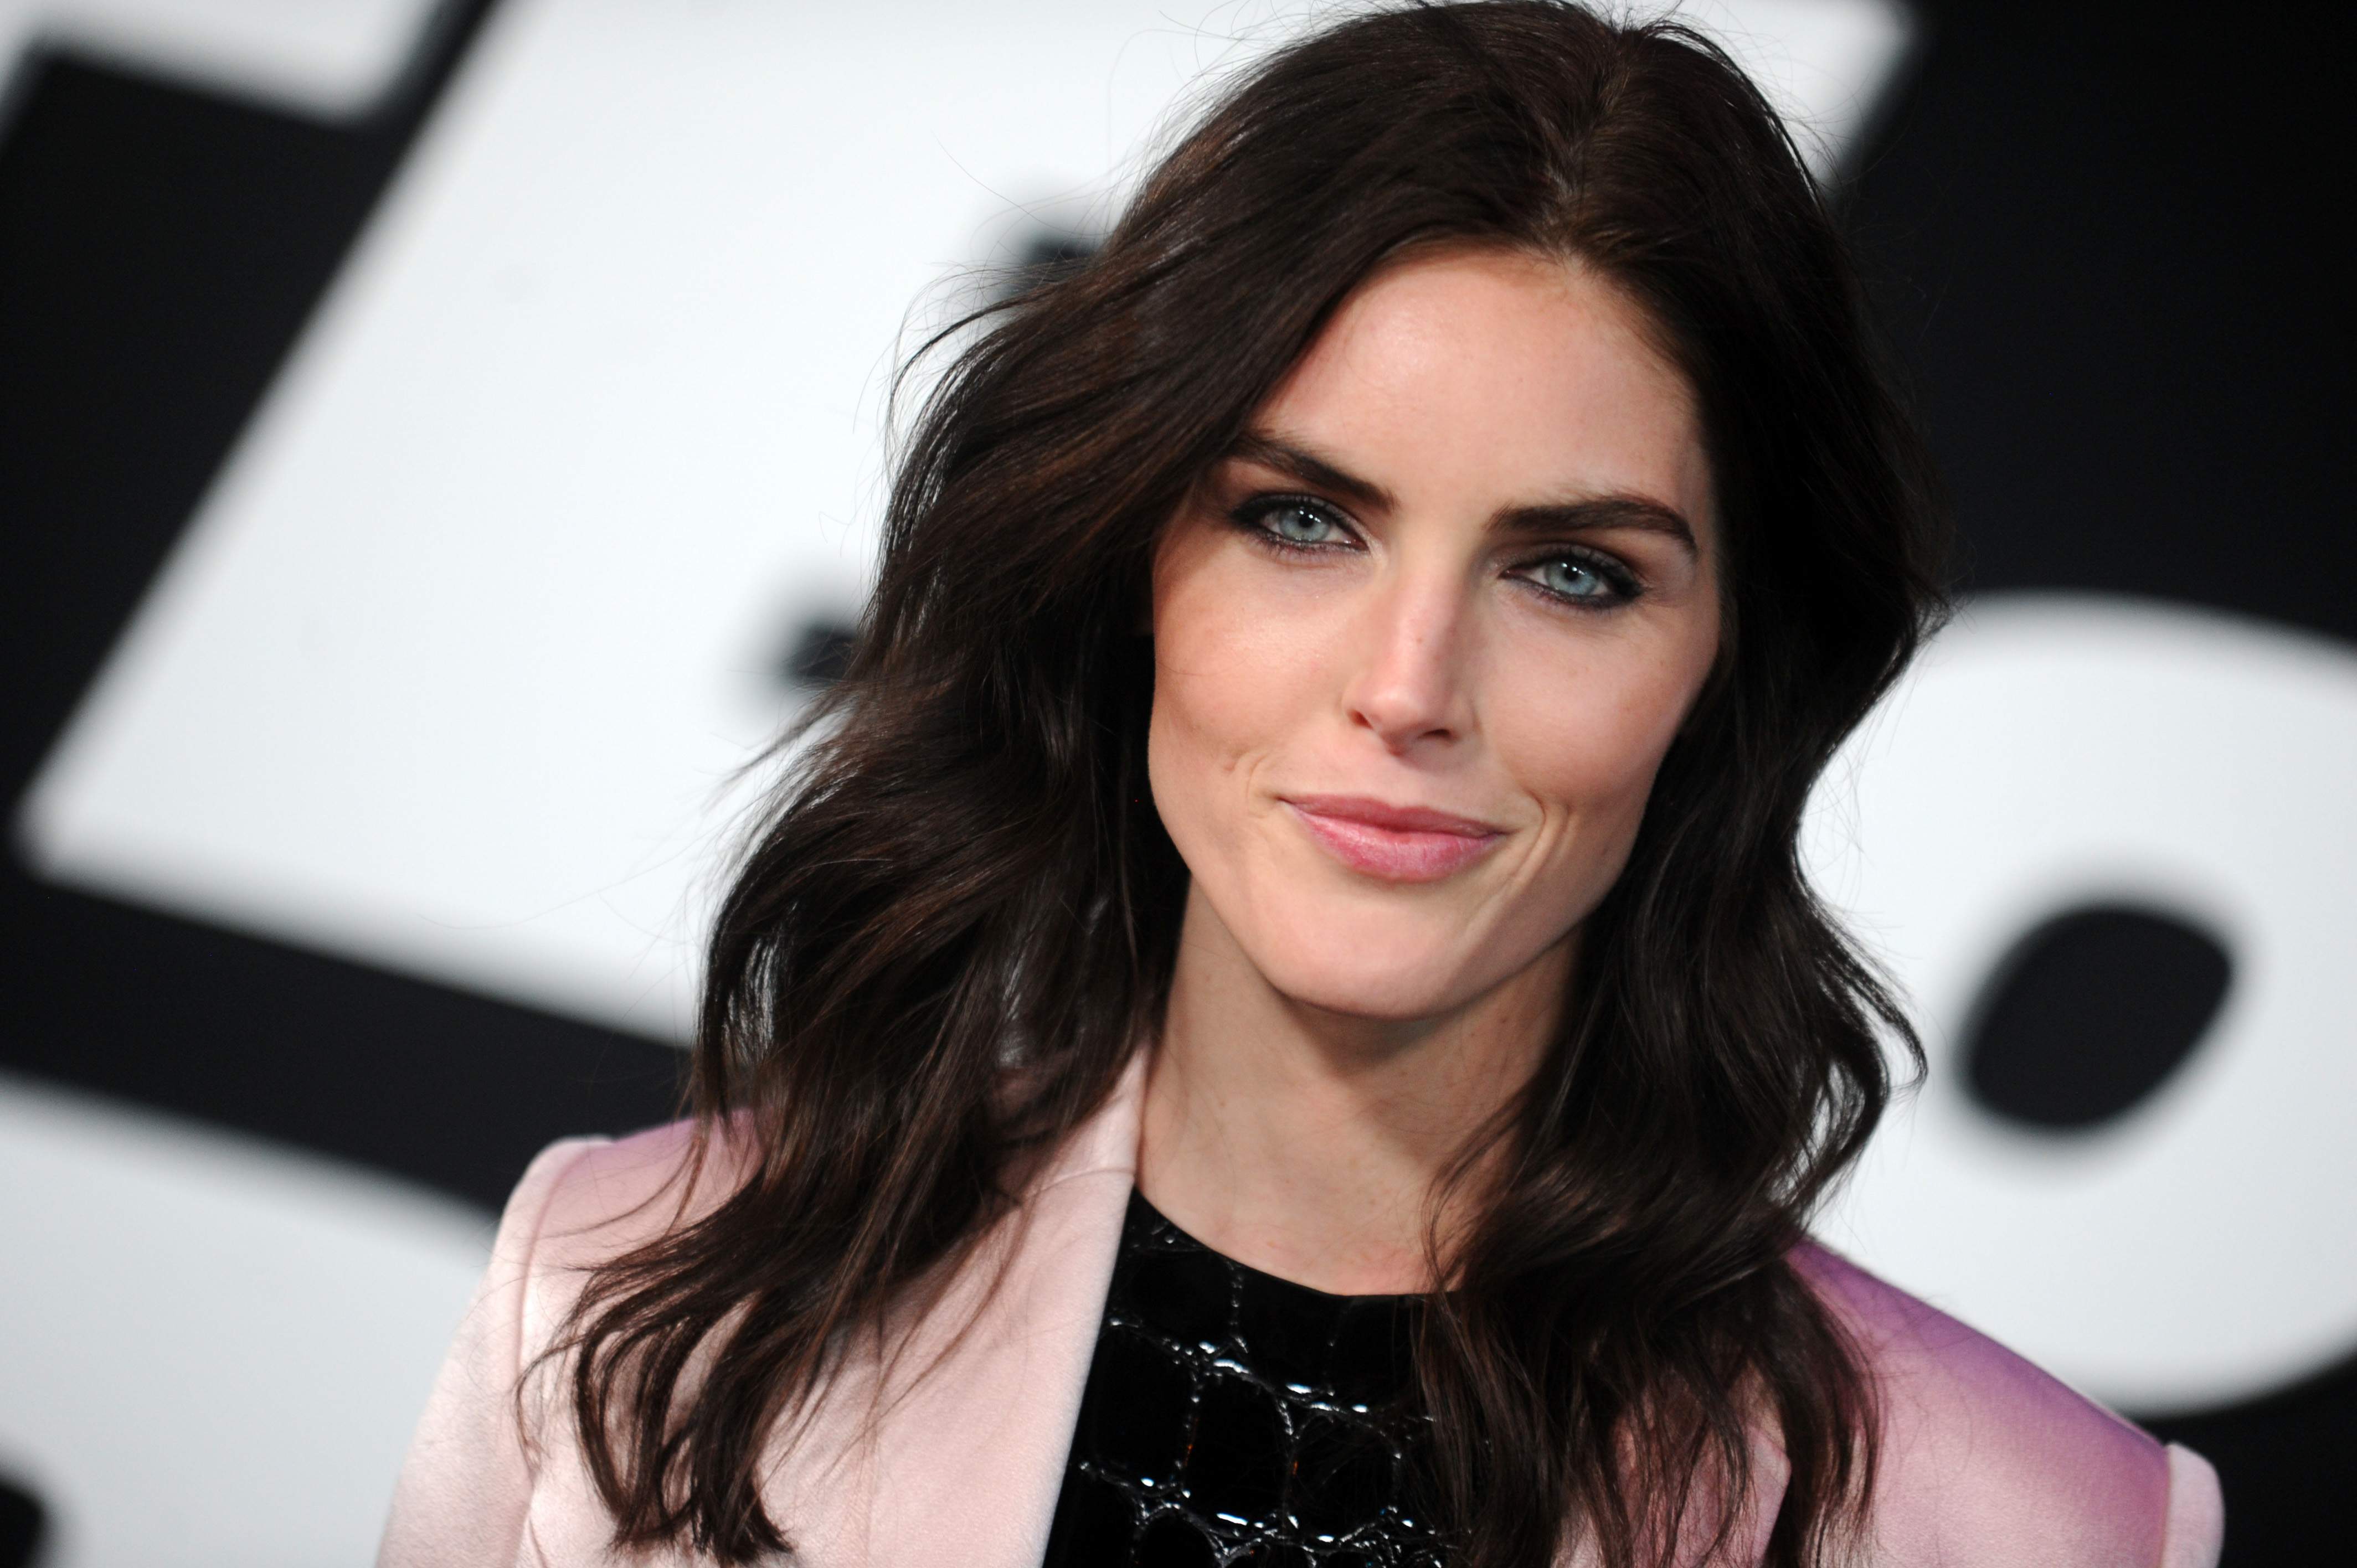 Hilary Rhoda attends The Fate Of The Furious Premiere